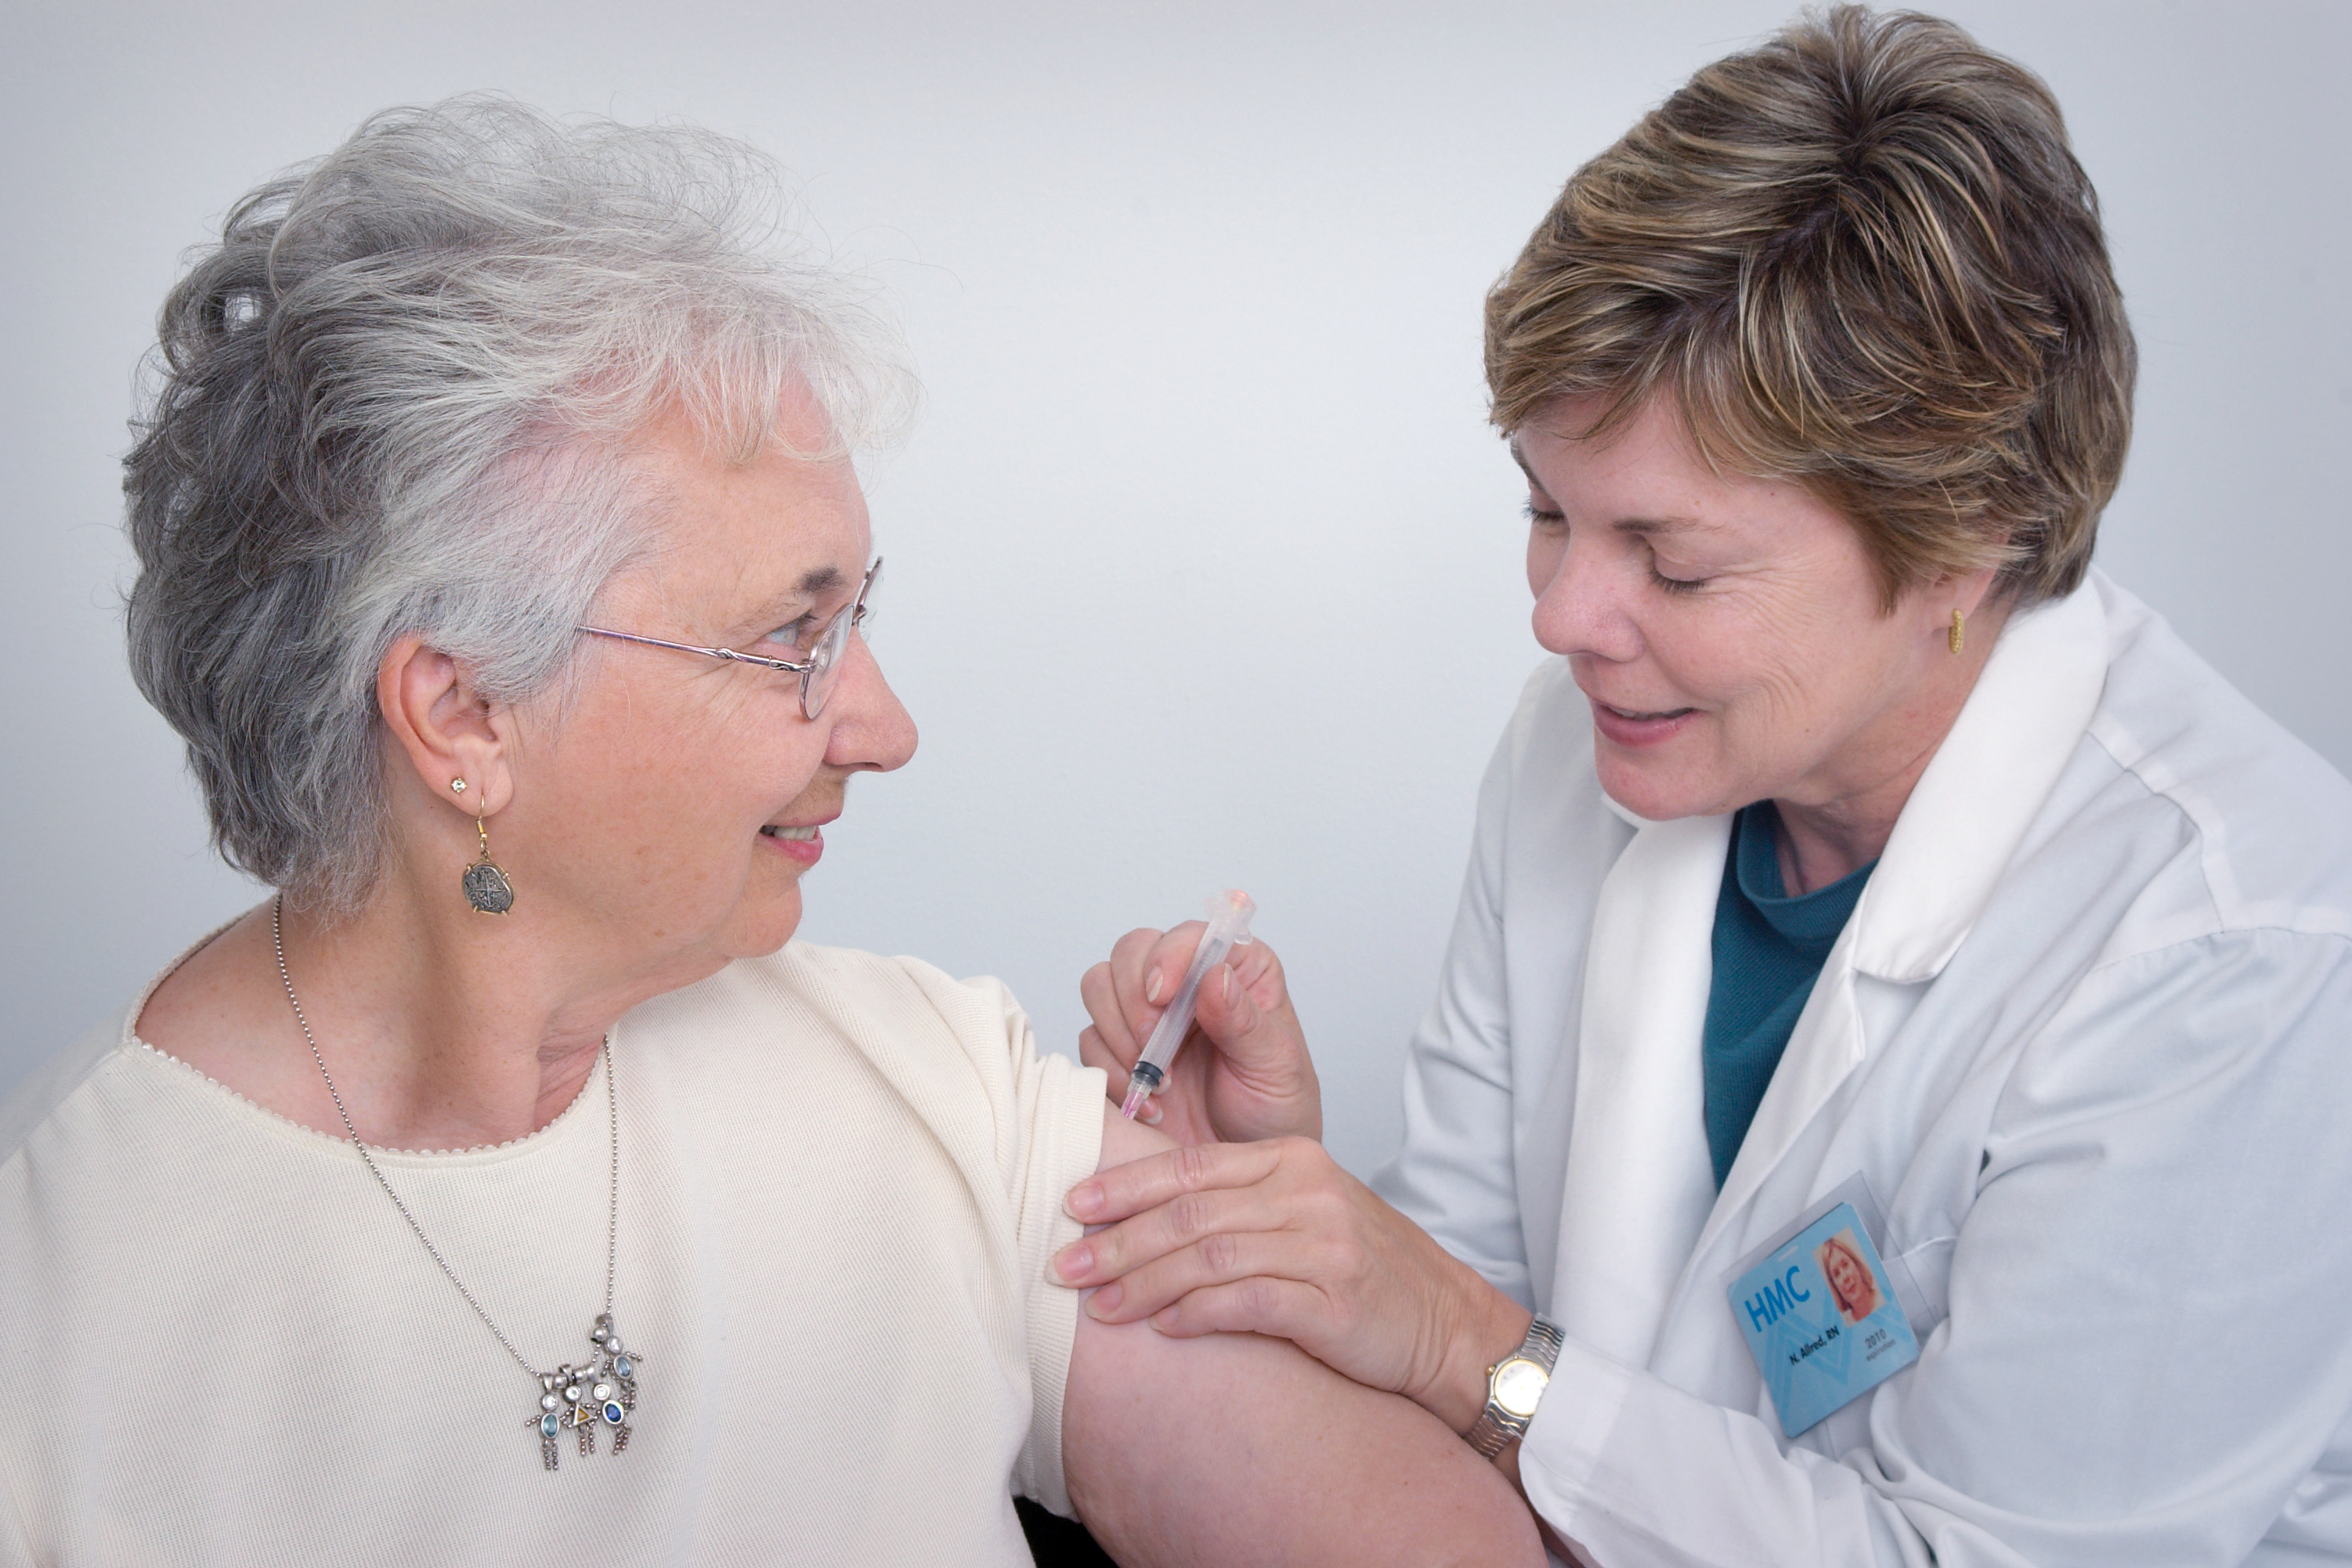 Flu Vaccination in Residential Aged Care Facilities by 1 May 2020